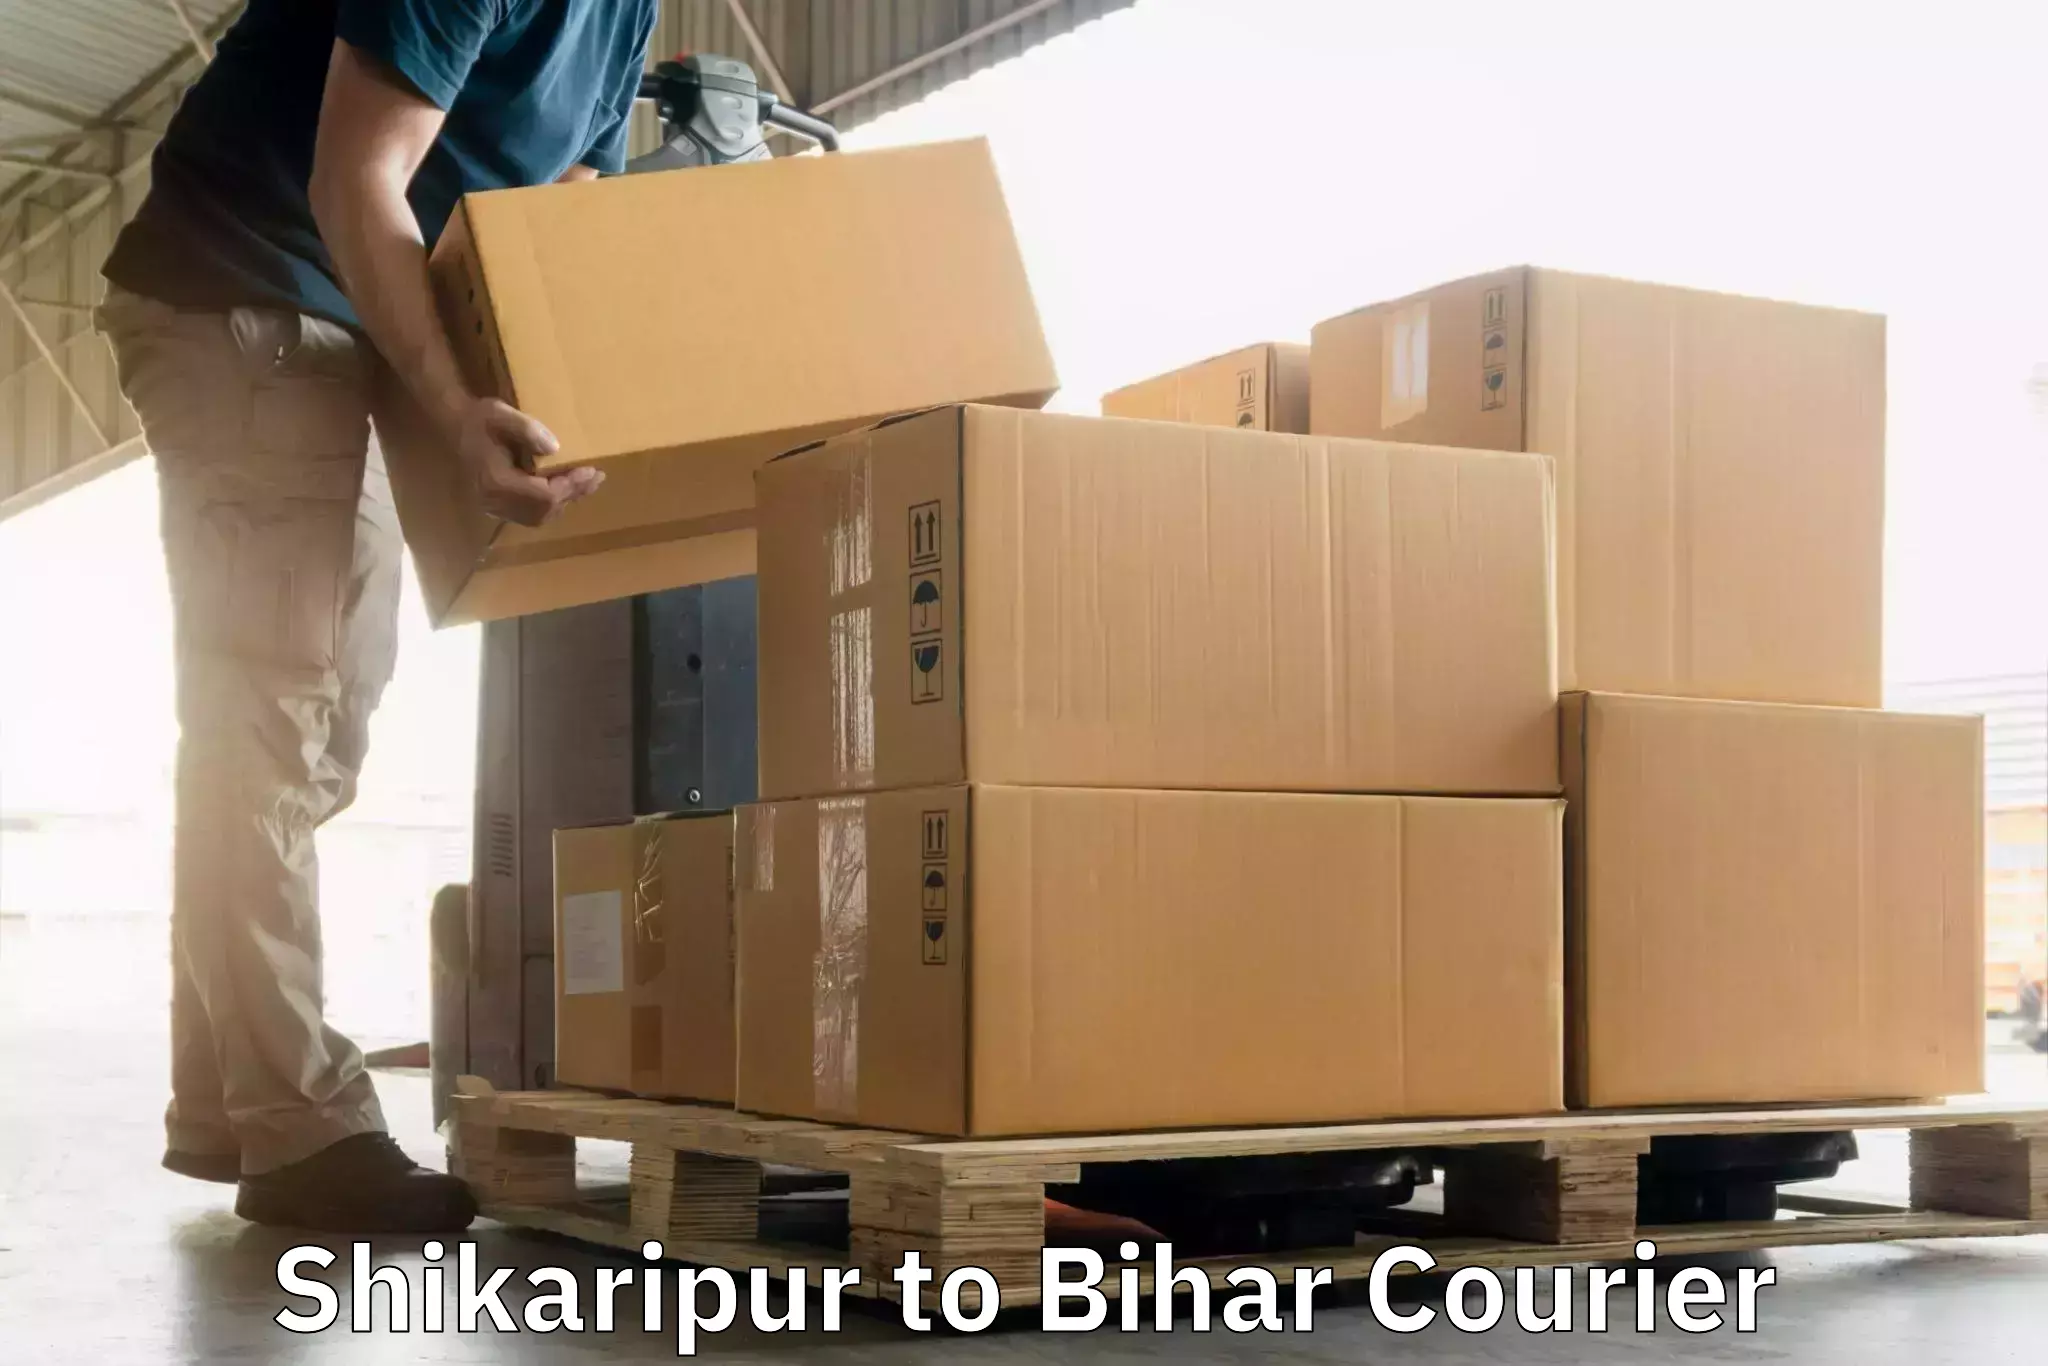 Flexible delivery schedules Shikaripur to Mohiuddin Nagar